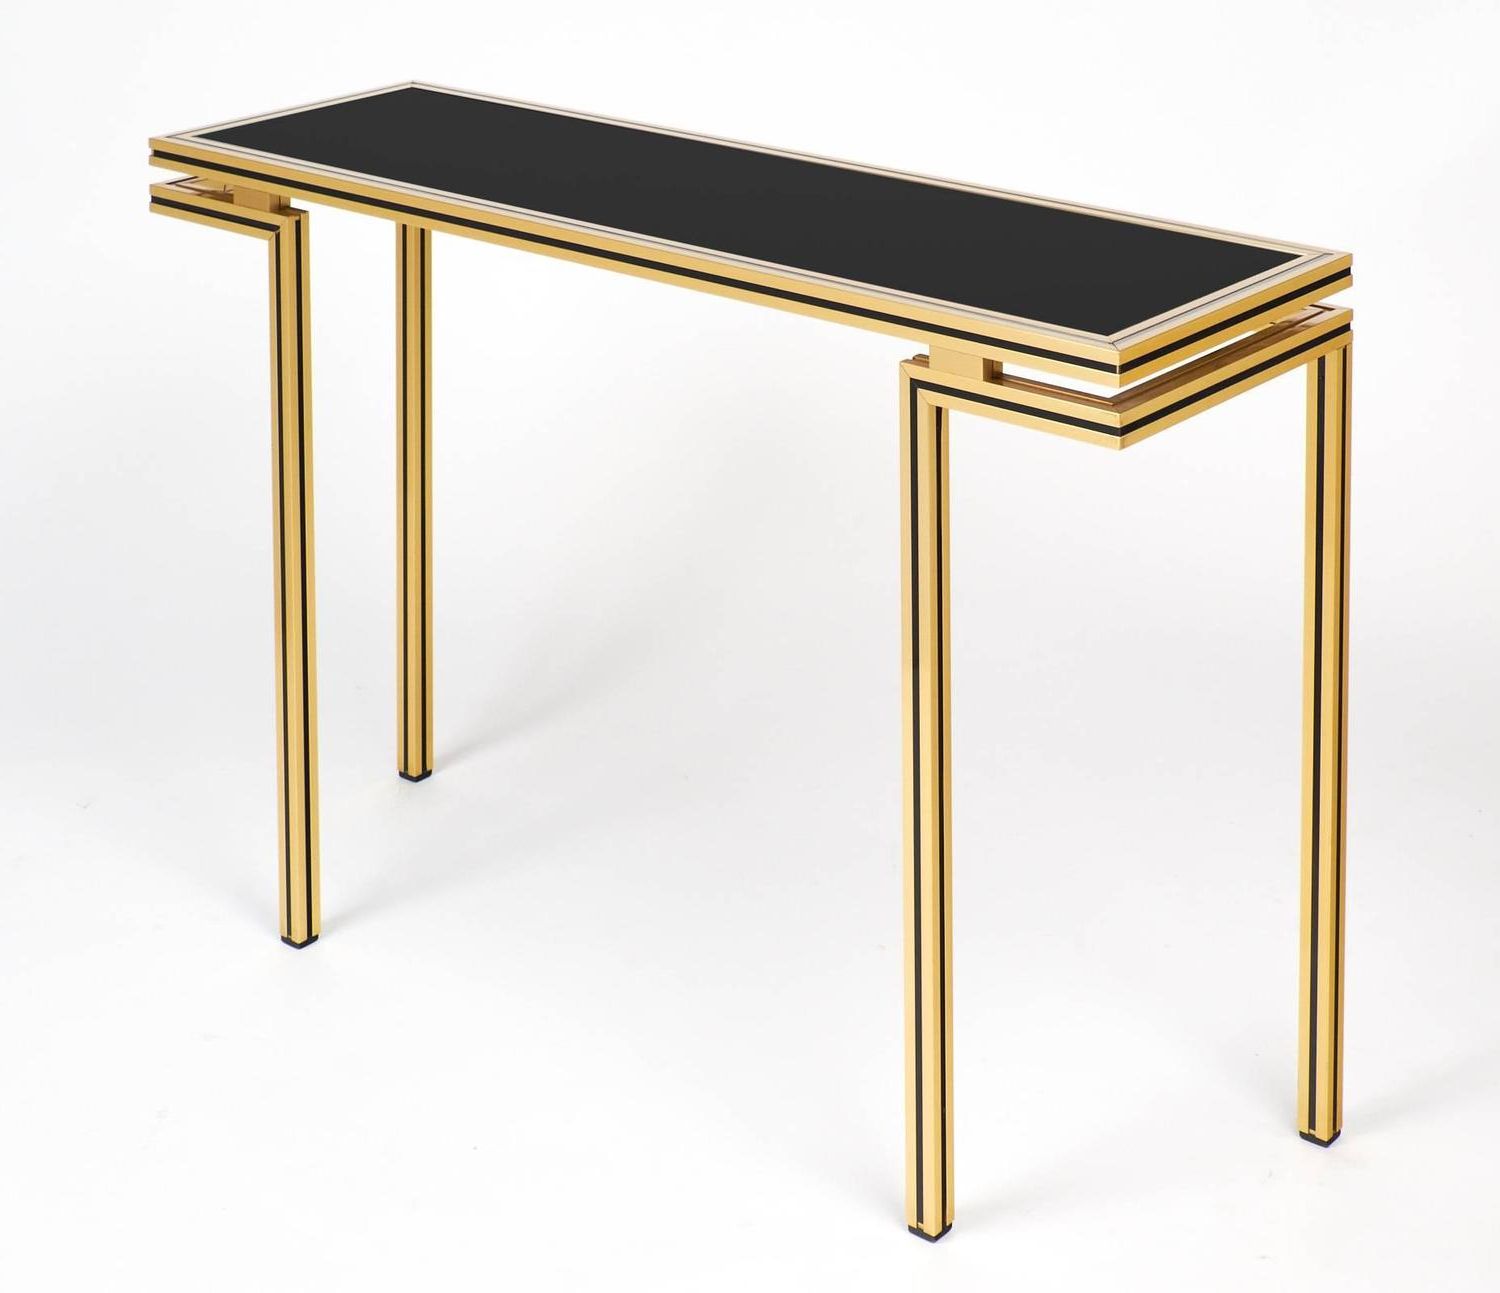 Antique Brass Aluminum Round Console Tables Within Most Current Vintage Black Glass Top Brass Console Tablepierre (View 3 of 10)